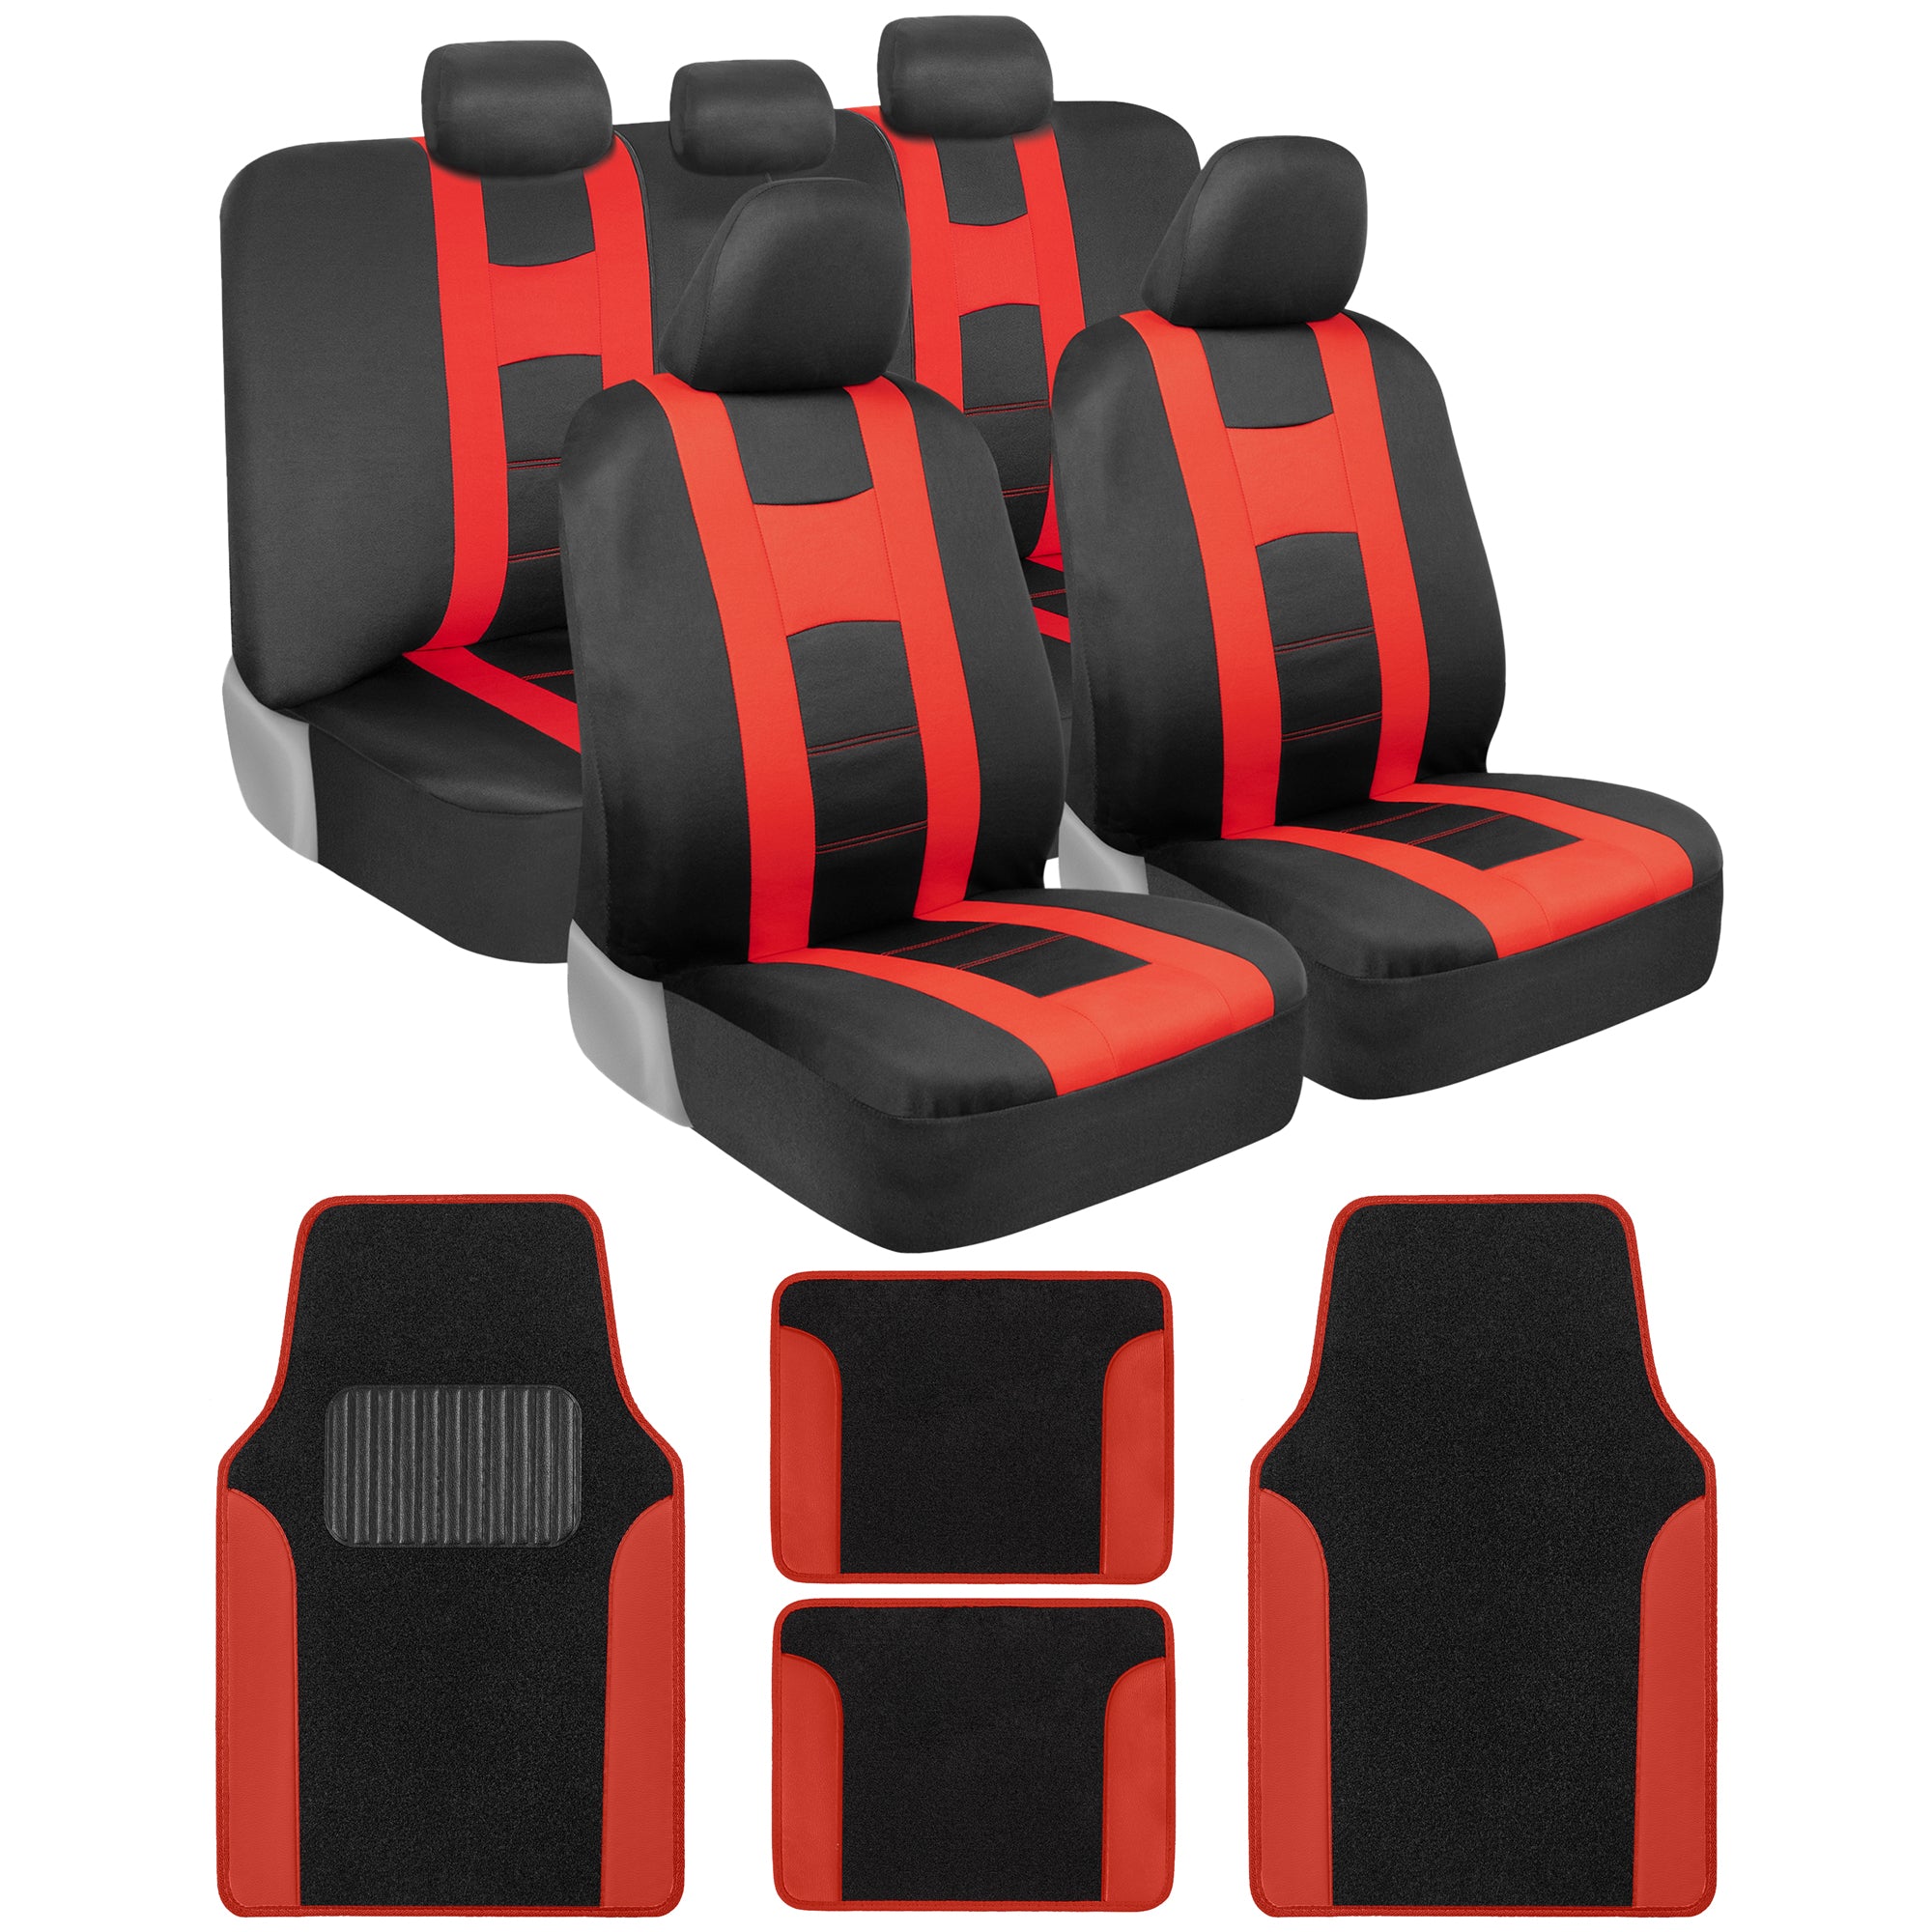 carXS Forza Series Red Seat Covers Full Set Combo with Car Floor Mats – Front and Rear Bench Seat Cover & Floor Mat Protector Set, Interior Covers for Auto Truck Van SUV